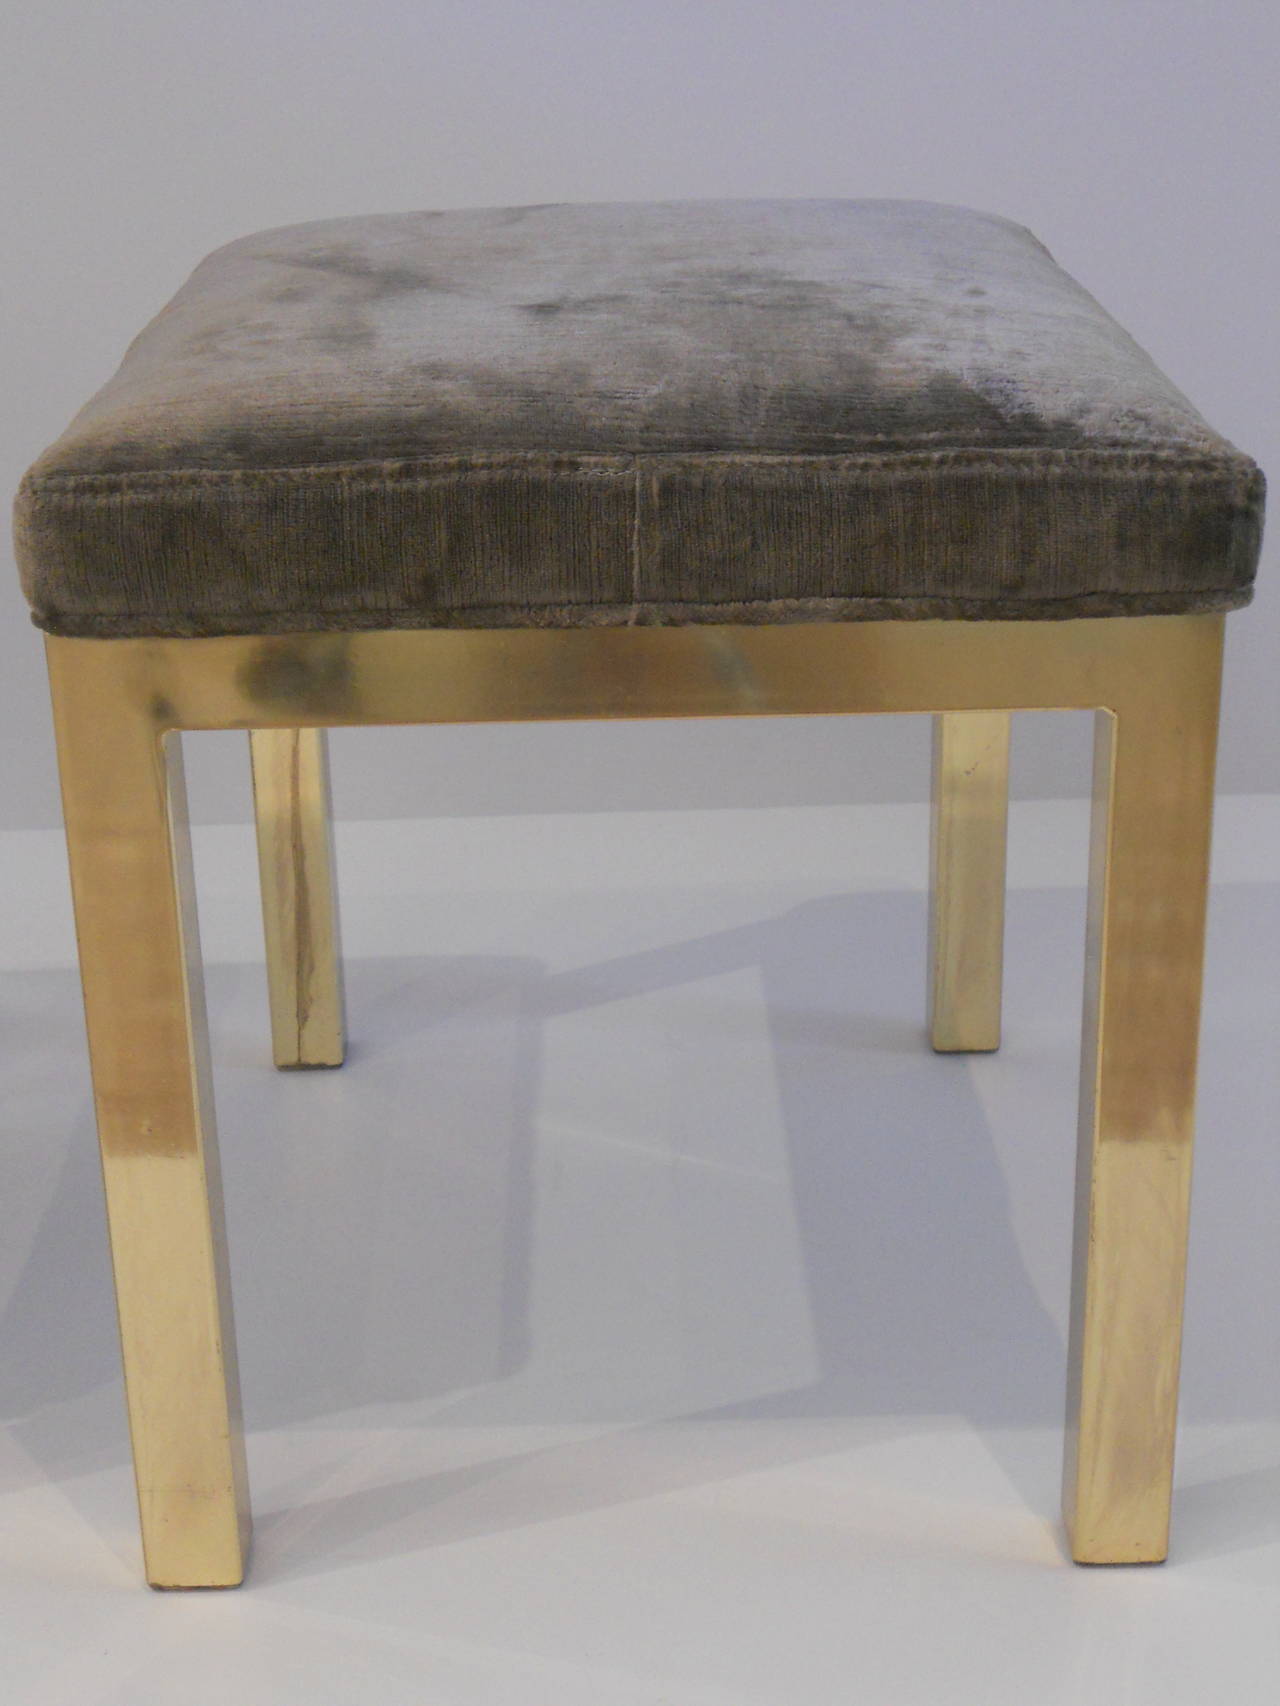 Modern Pair of Vintage Brass Ottomans or Stools, c.1970